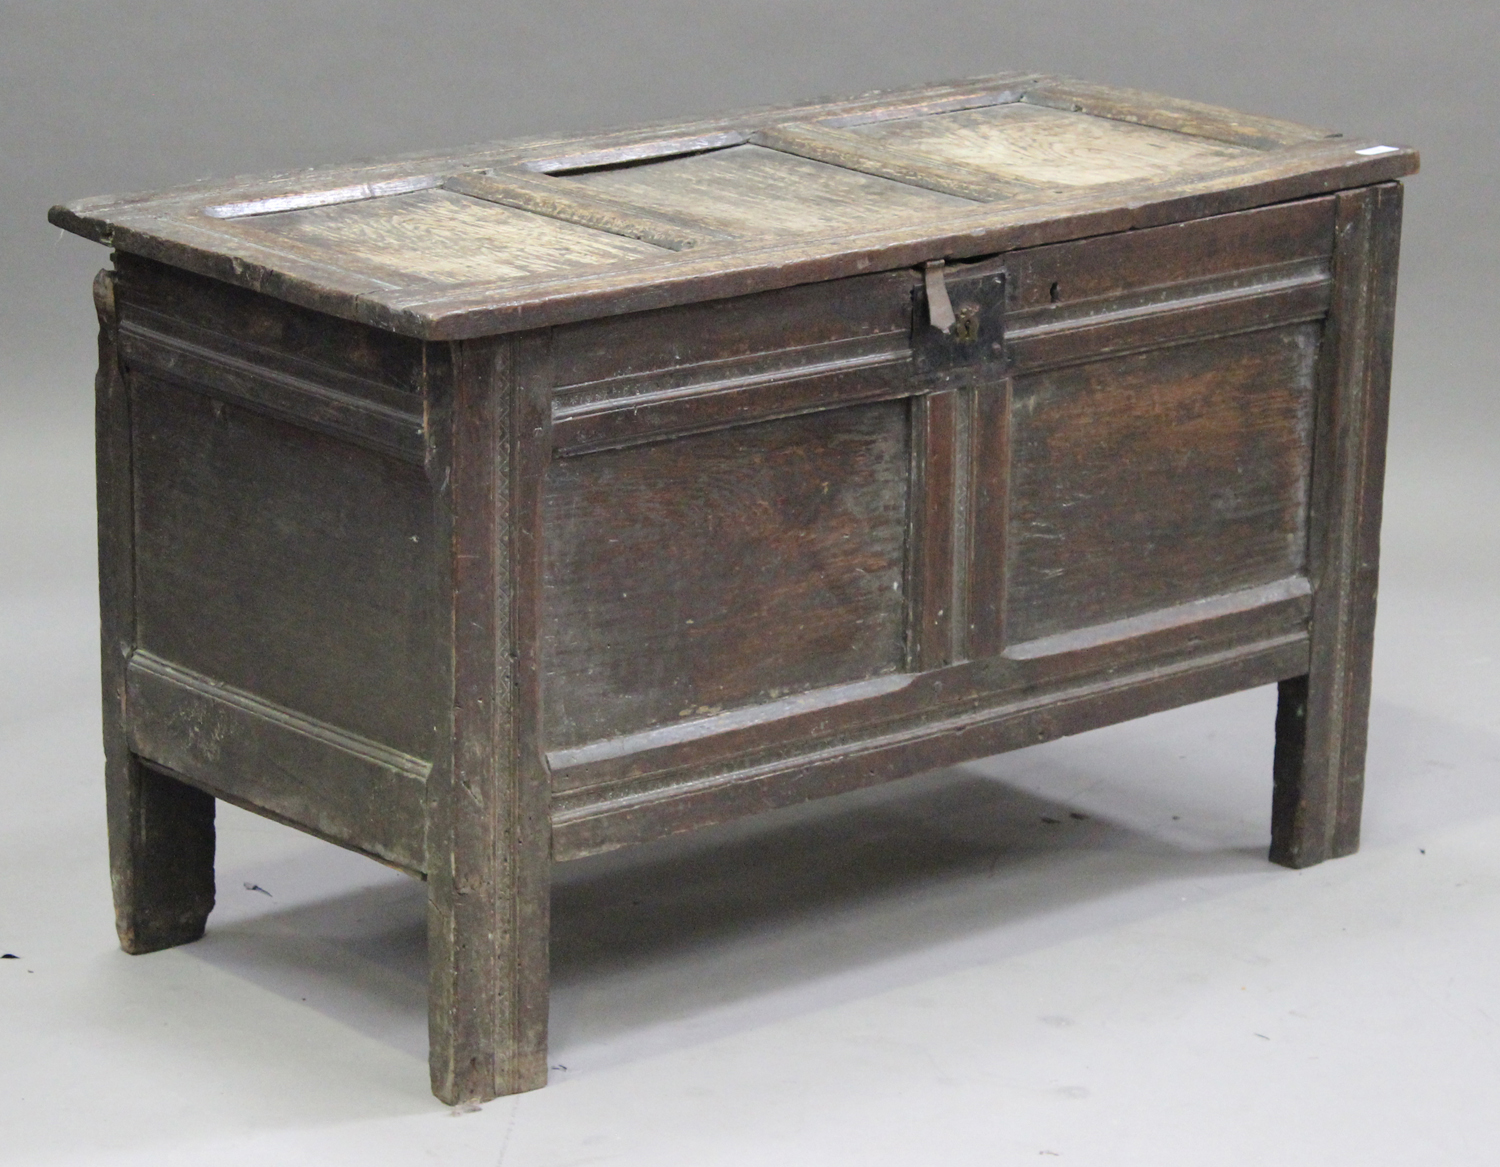 An 18th century oak panelled coffer, the hinged lid revealing a candlebox, on stile supports, height